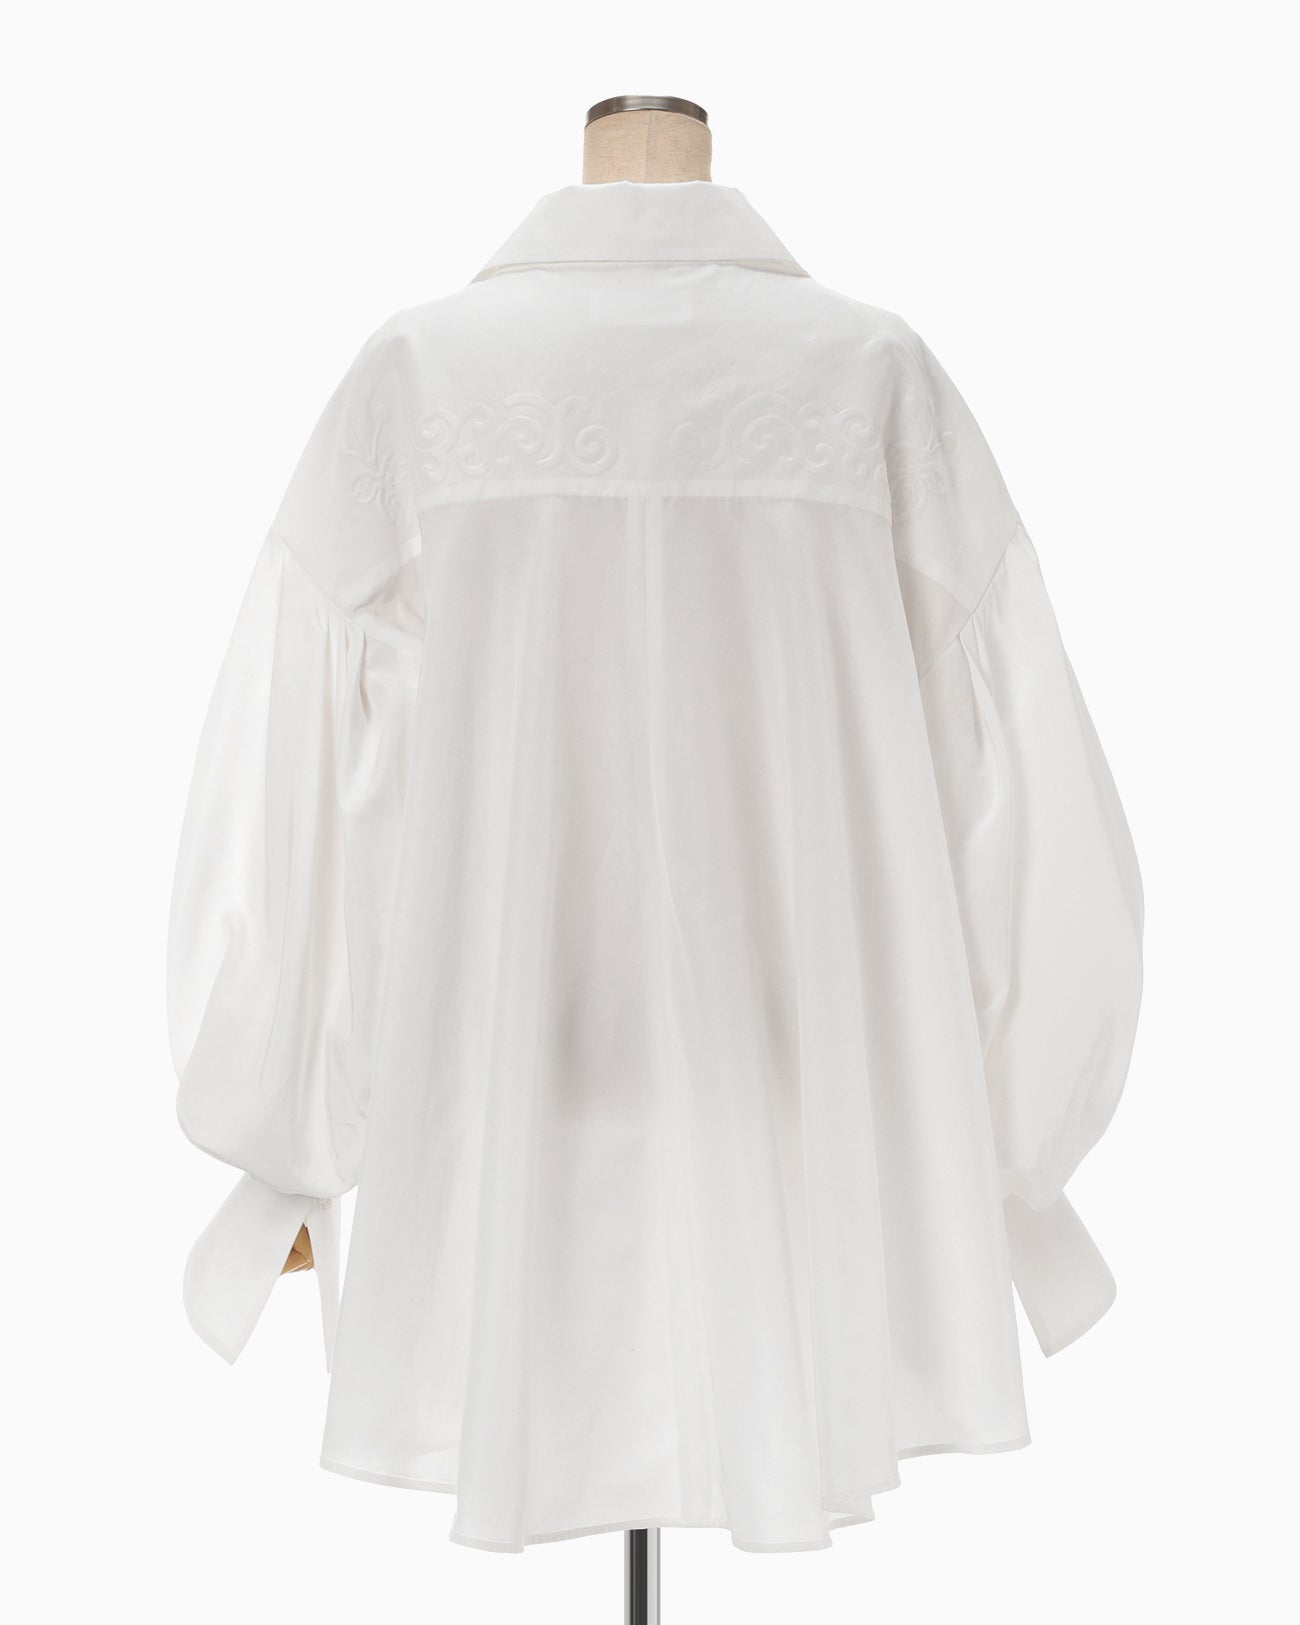 Floral Embossed Oversized Cotton Shirt - white